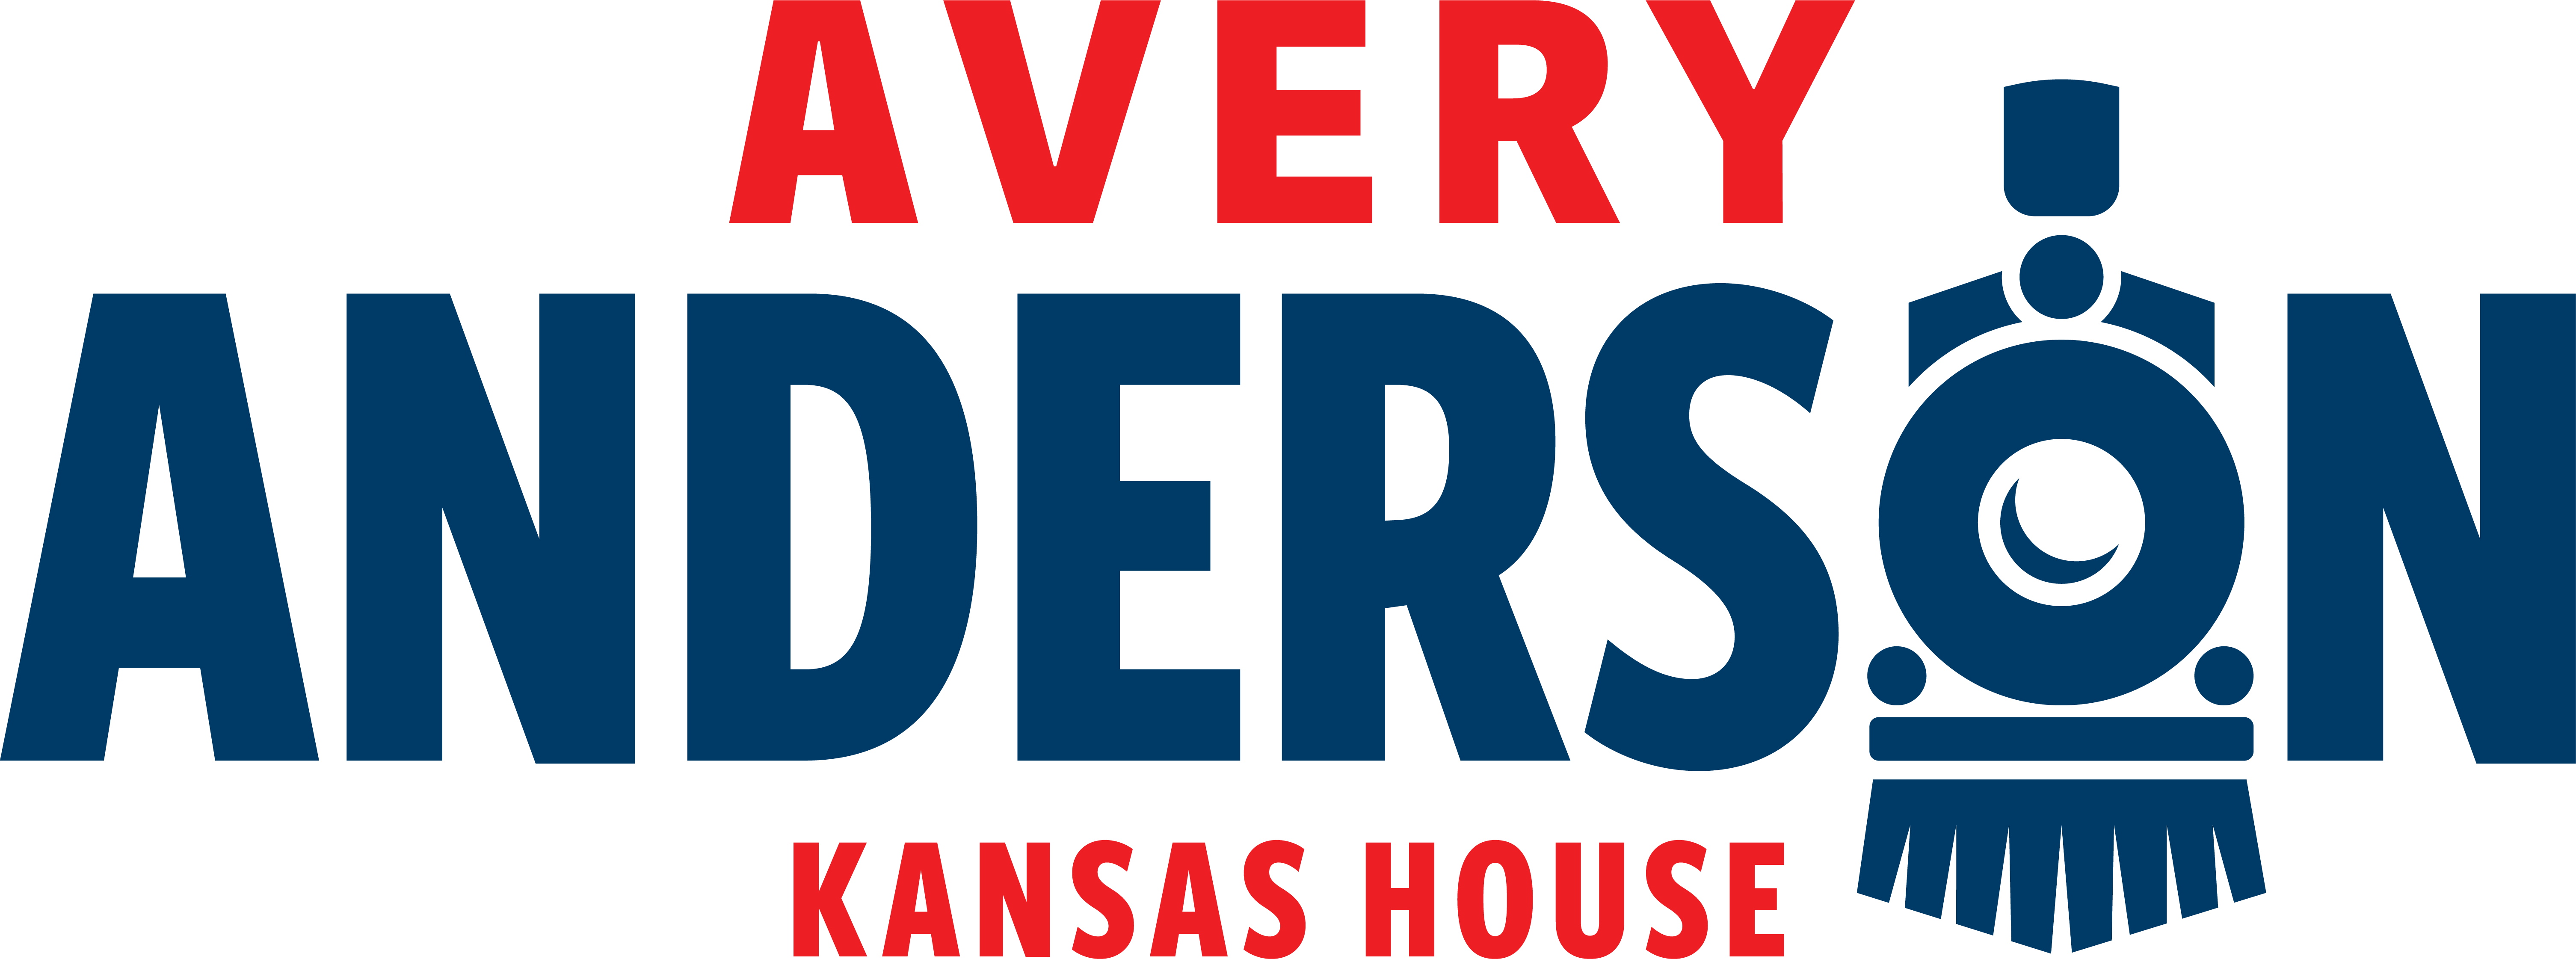 Avery Anderson | For Kansas House